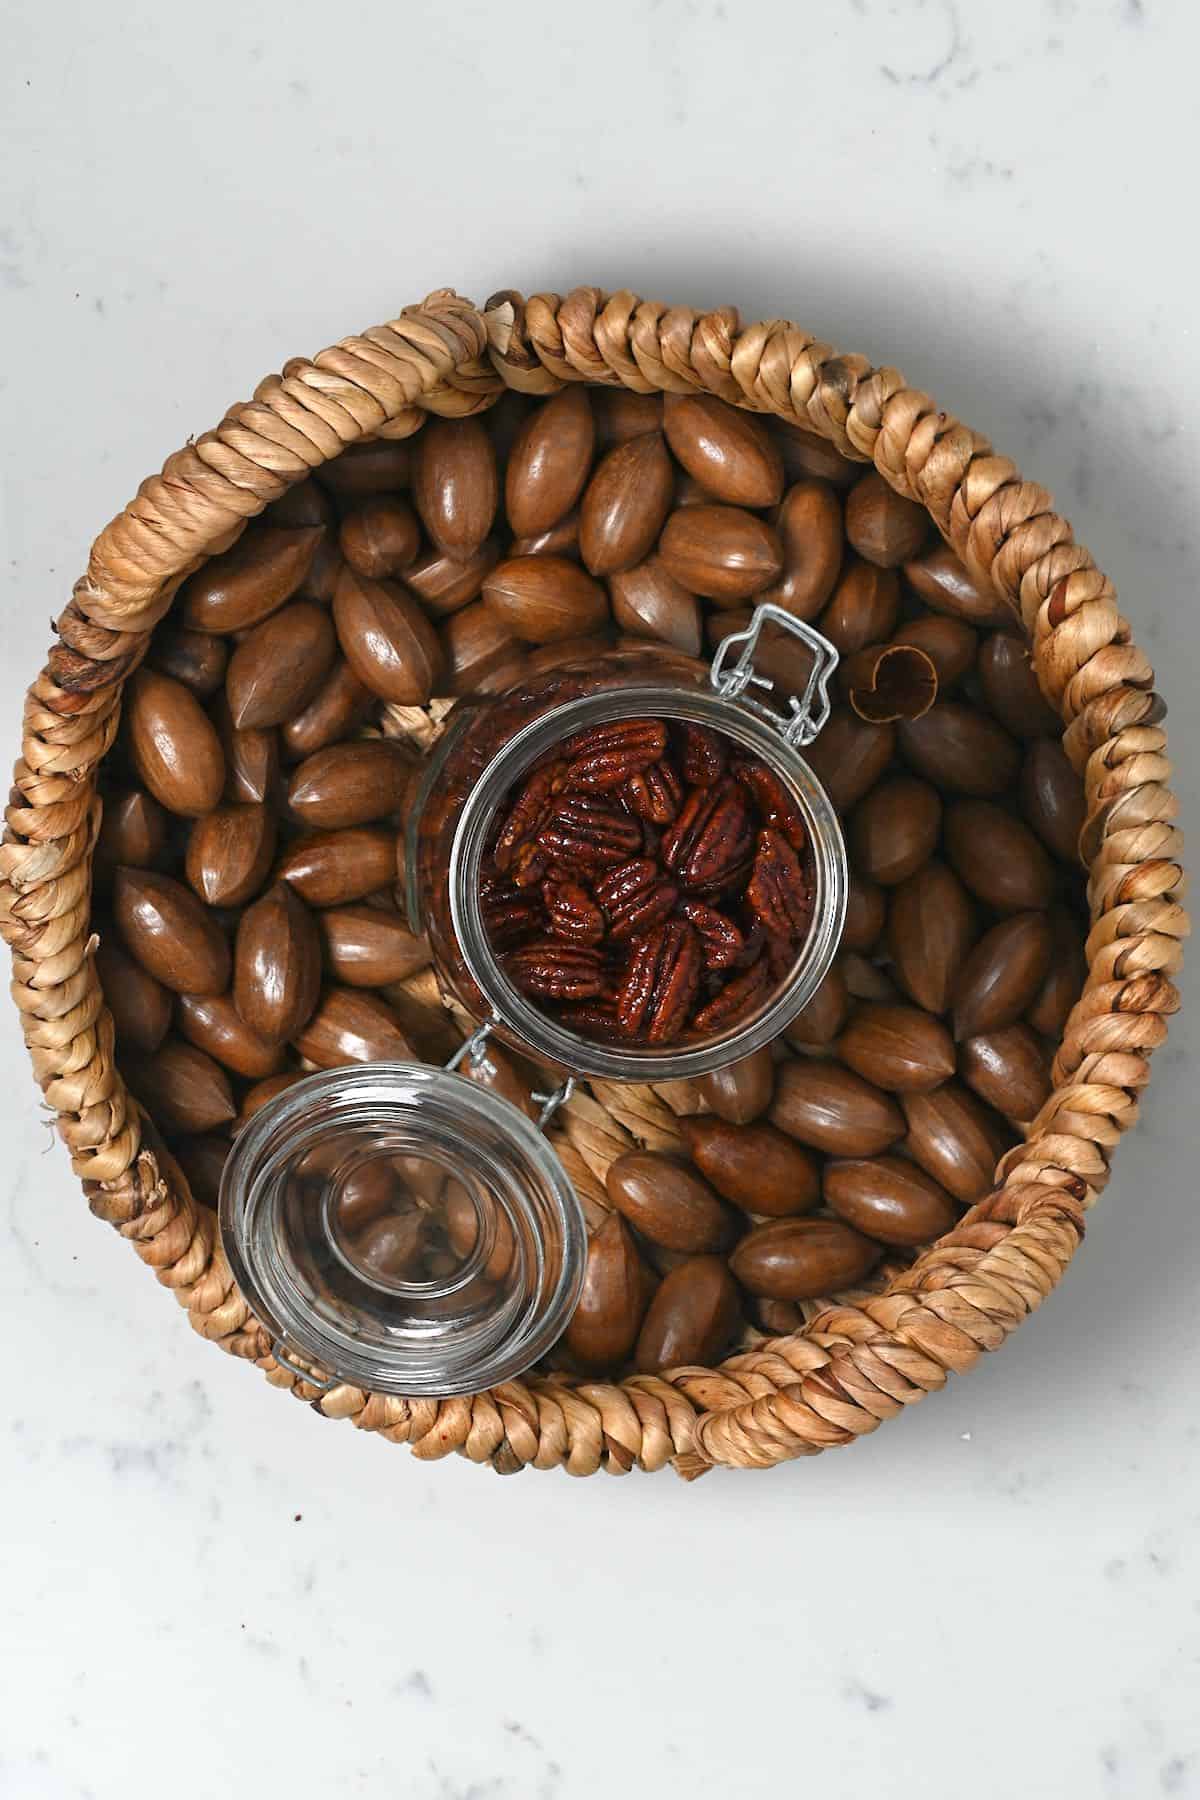 A basket with pecans and a jar with candied pecans